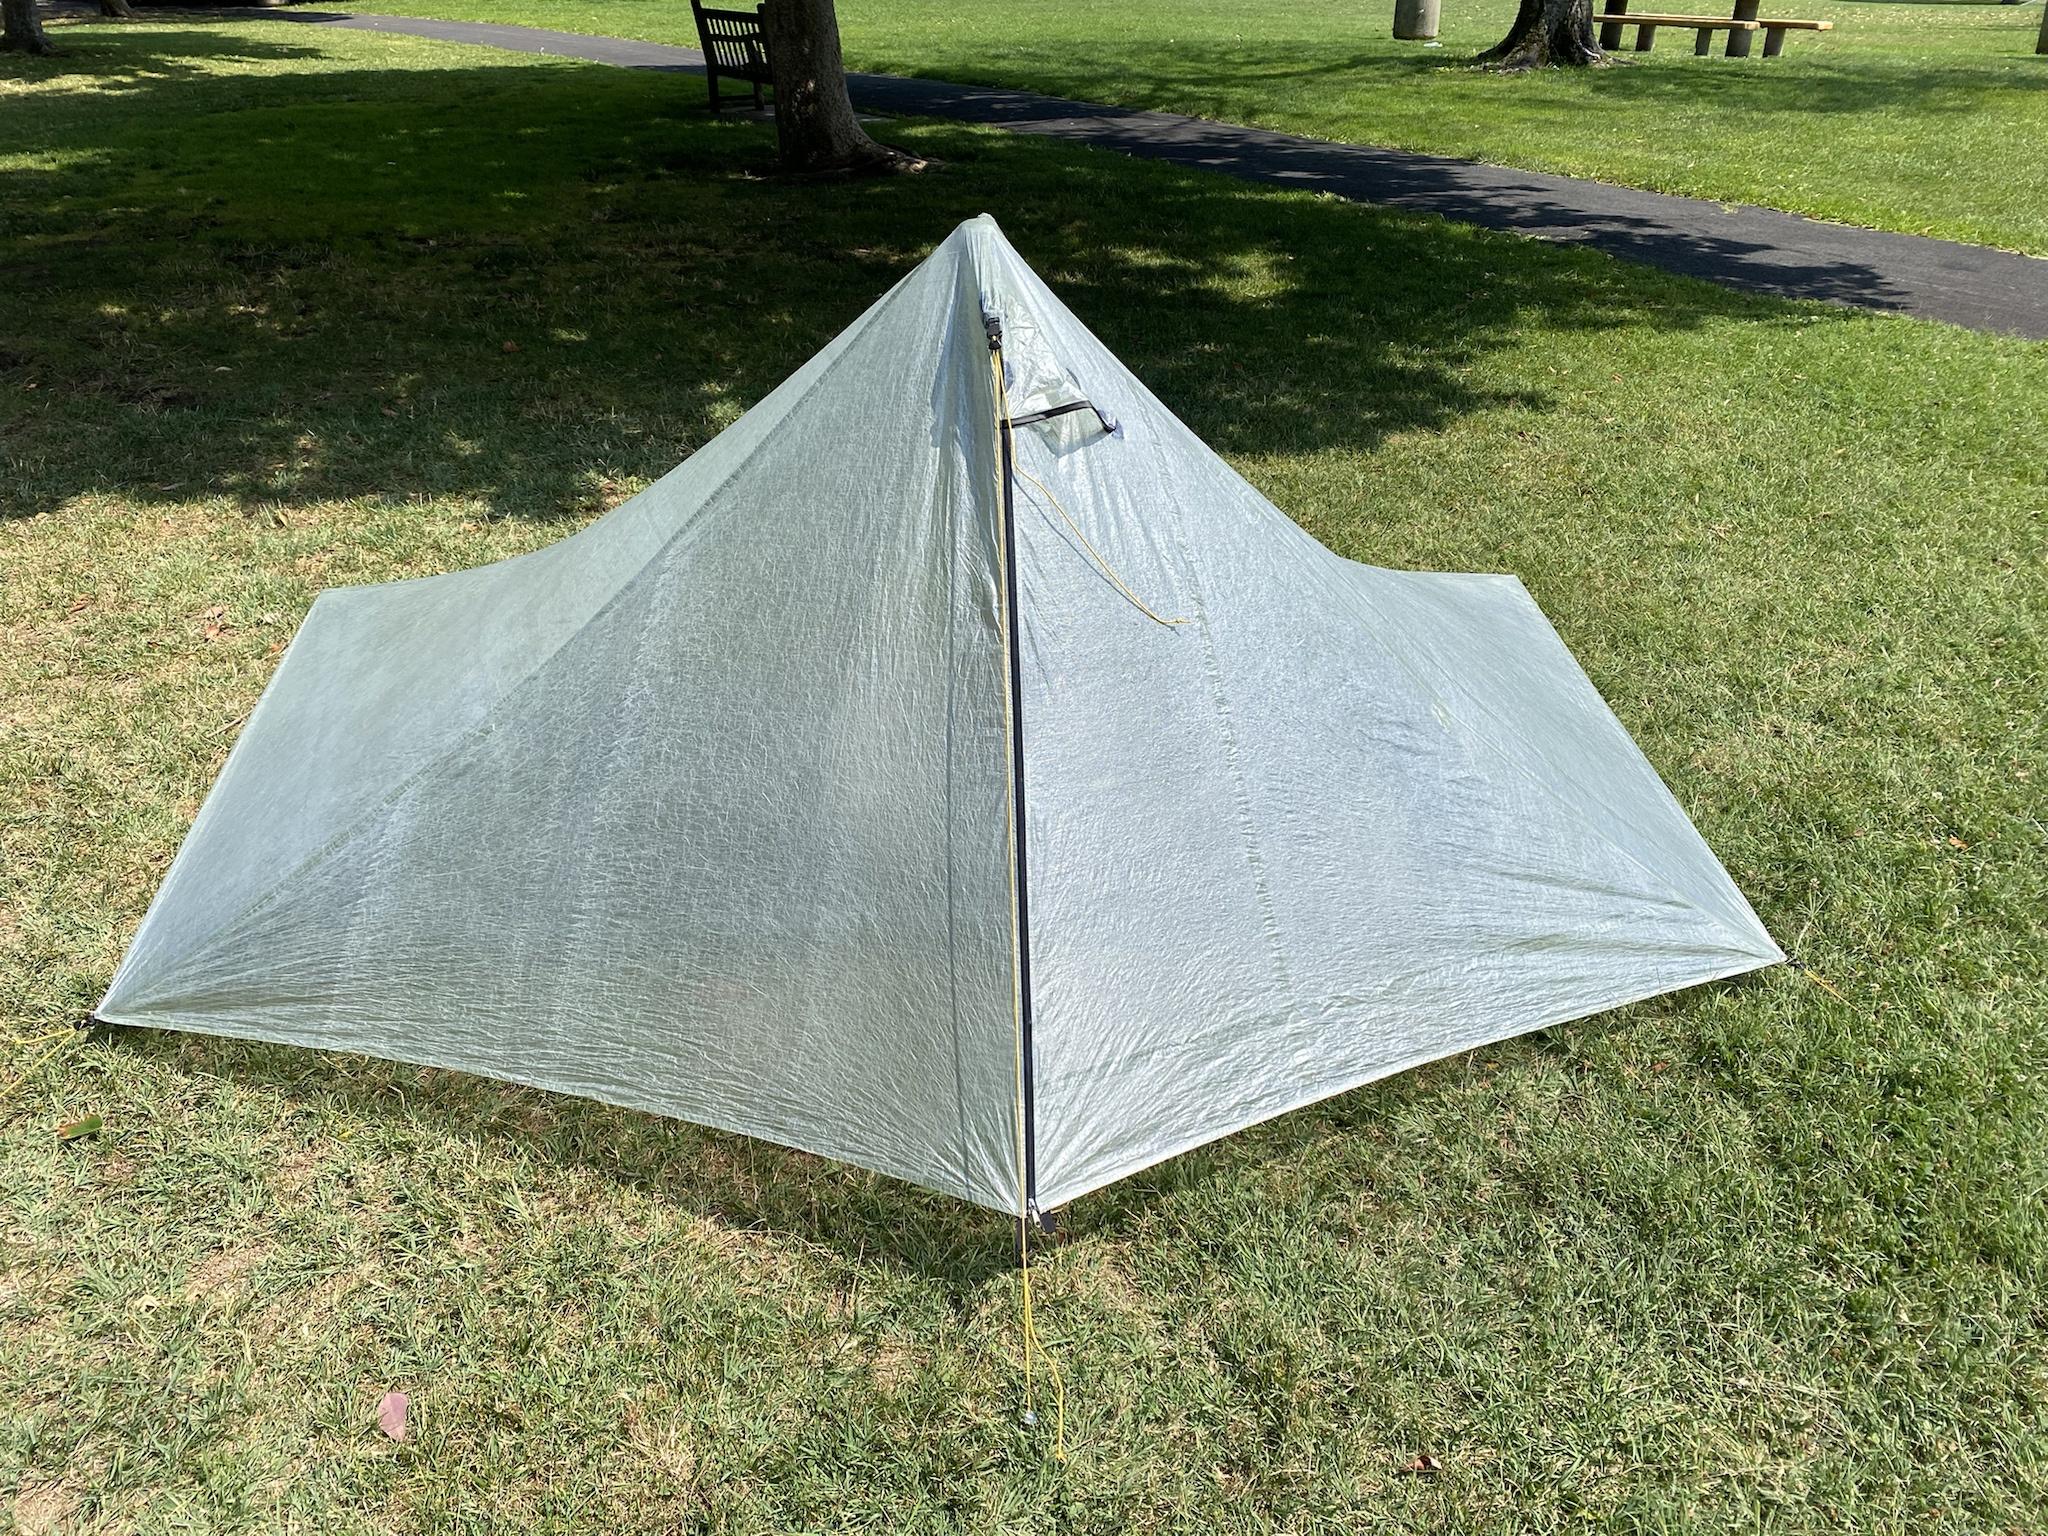 Tarptent Aeon Li used for one night - Backpacking Light